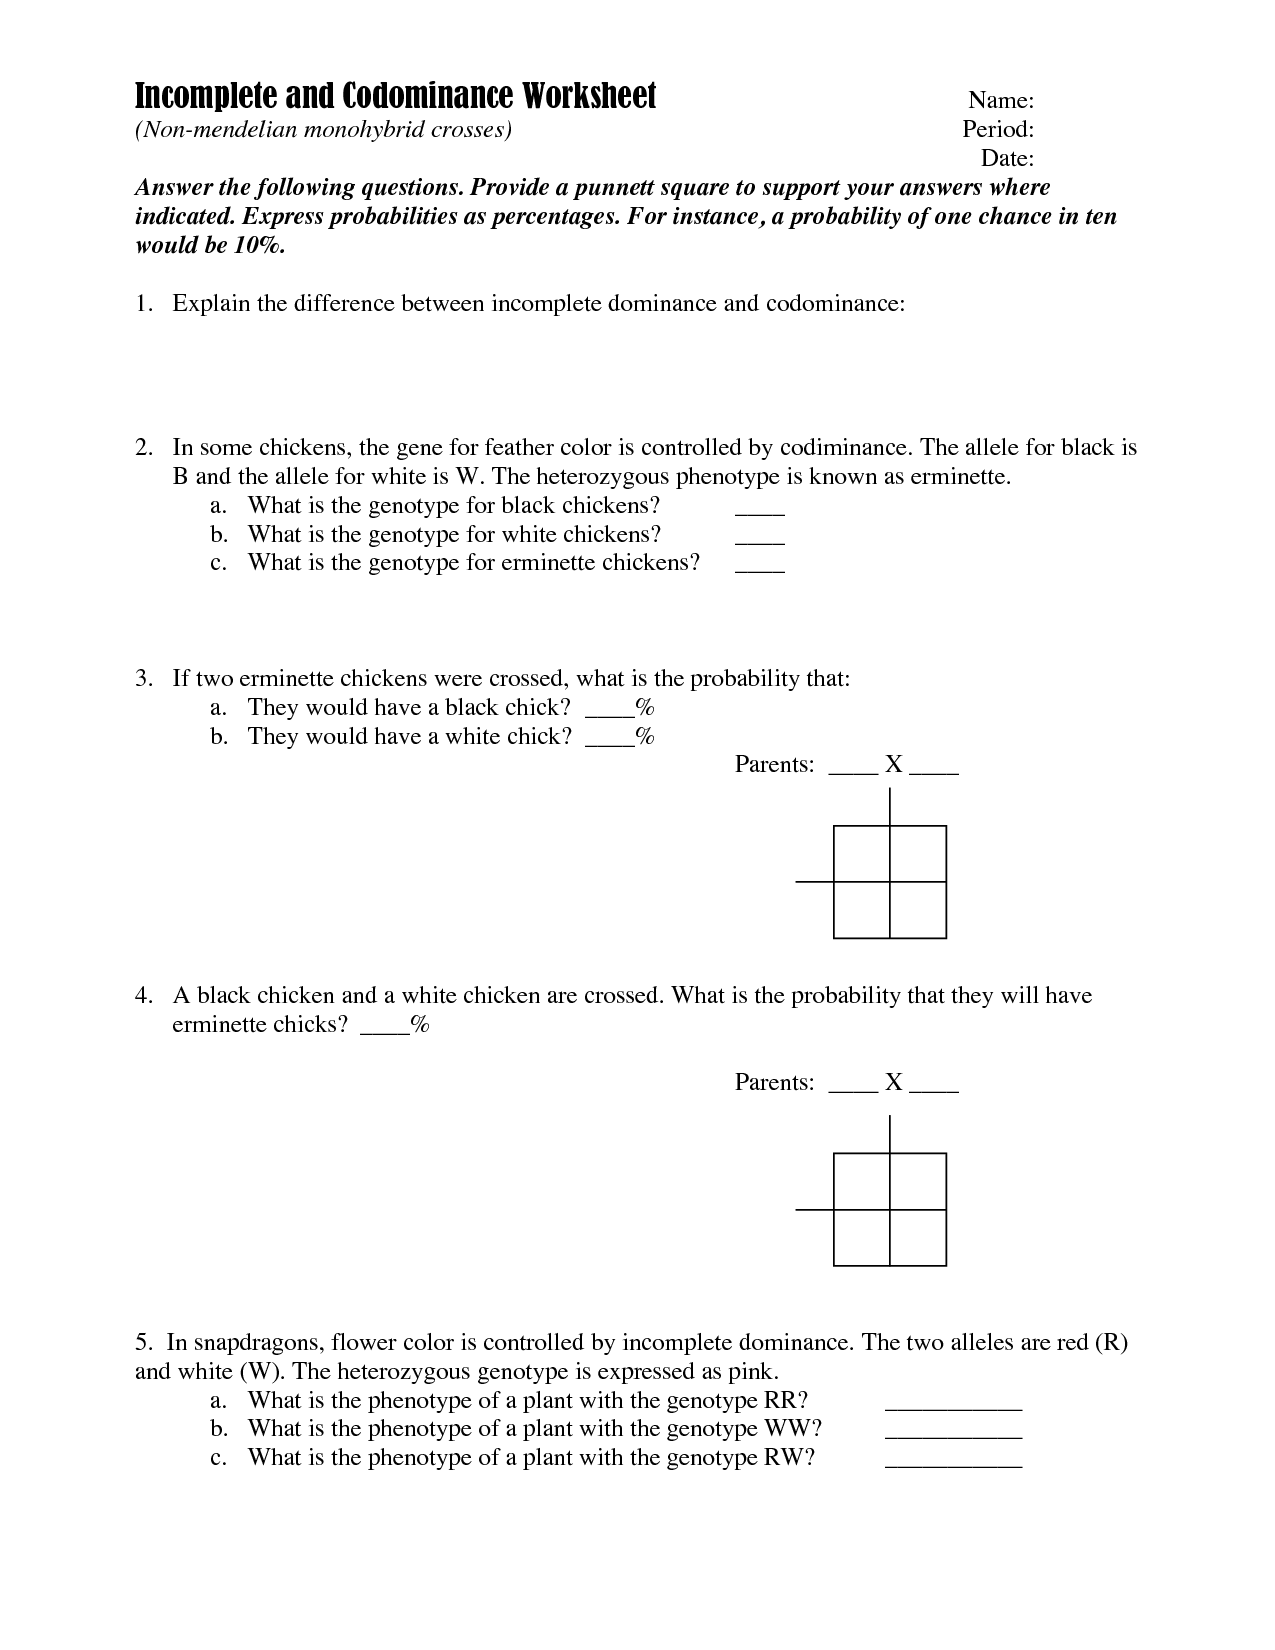 Incomplete And Codominant Traits Worksheet Answer Key